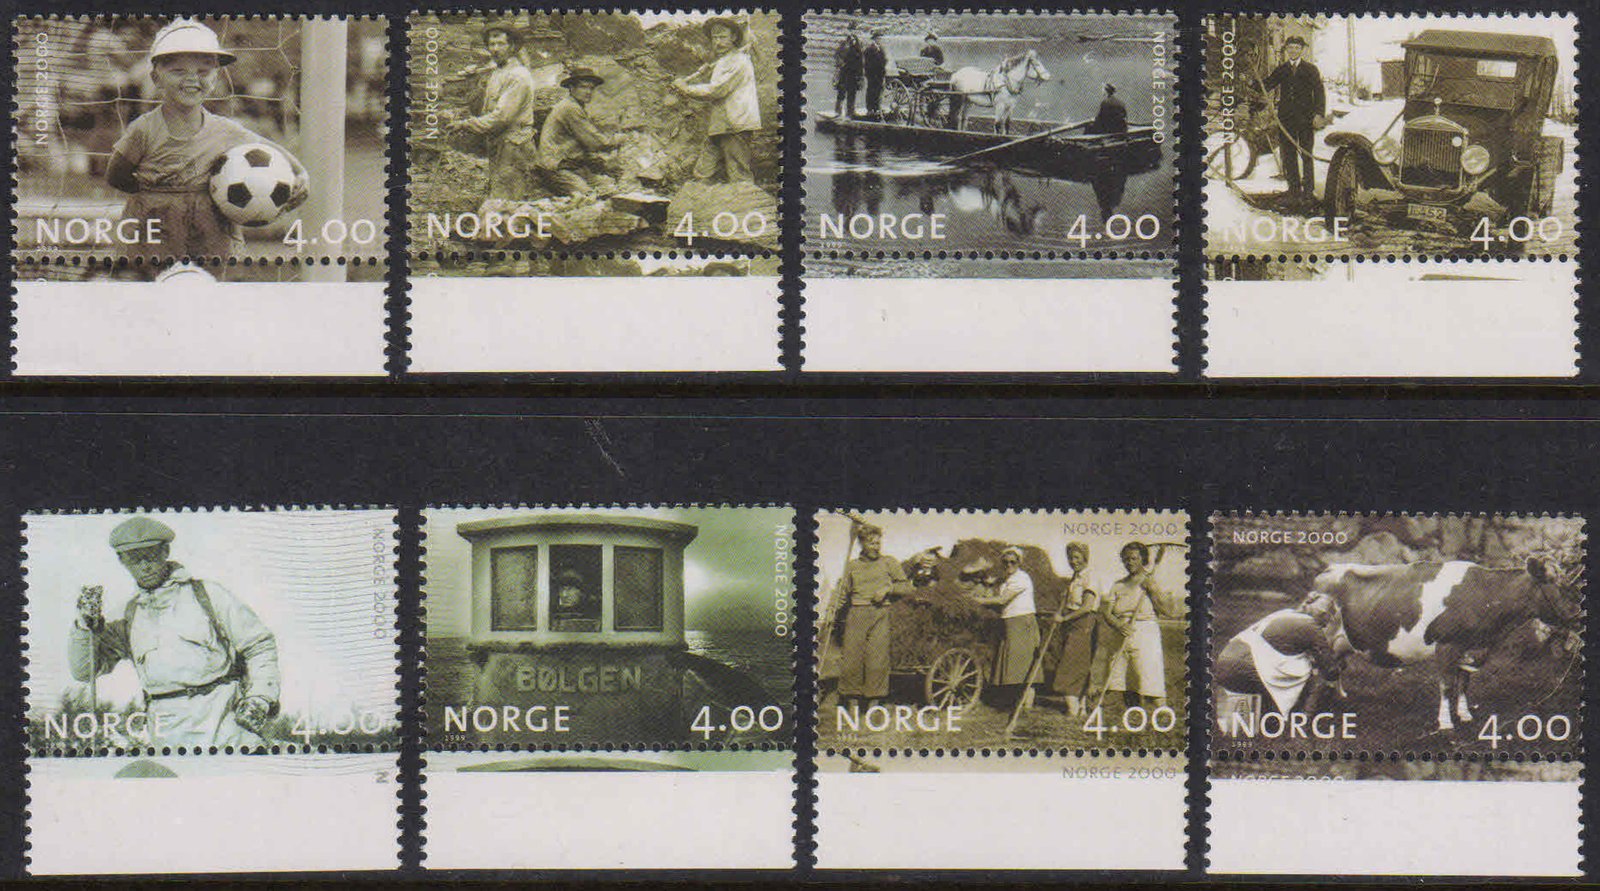 NORWAY 1999-Photographs of Life in Norway, Ferry, Milk, Cow, Football, Fishing Boat, Set of 8, MNH, S.G. 1346-52-Cat £ 15-